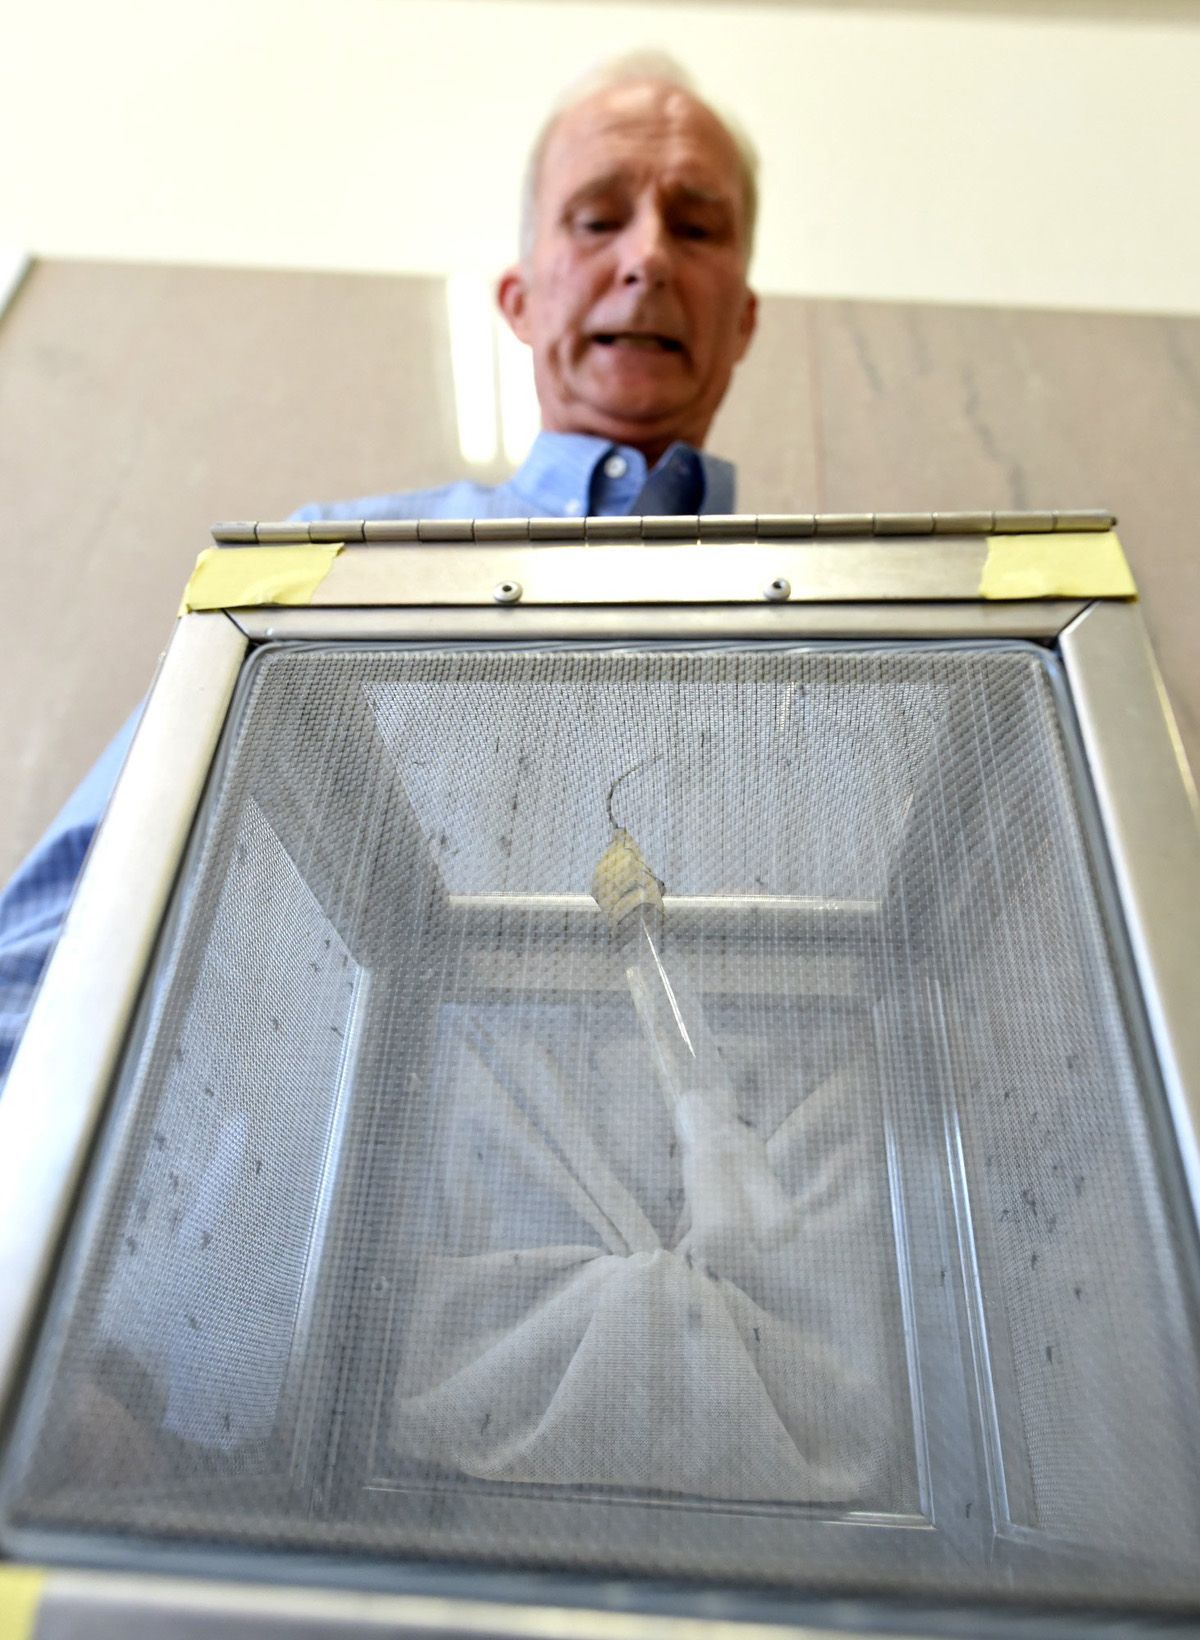 Steve Mulligan, district manager of the Consolidated Mosquito Abatement District, holds a container with Aedes aegyptimosquitoes during a news conference at the Fresno County Department of Health in July 2016. Image by John Walker / The Fresno Bee. United States, 2016.